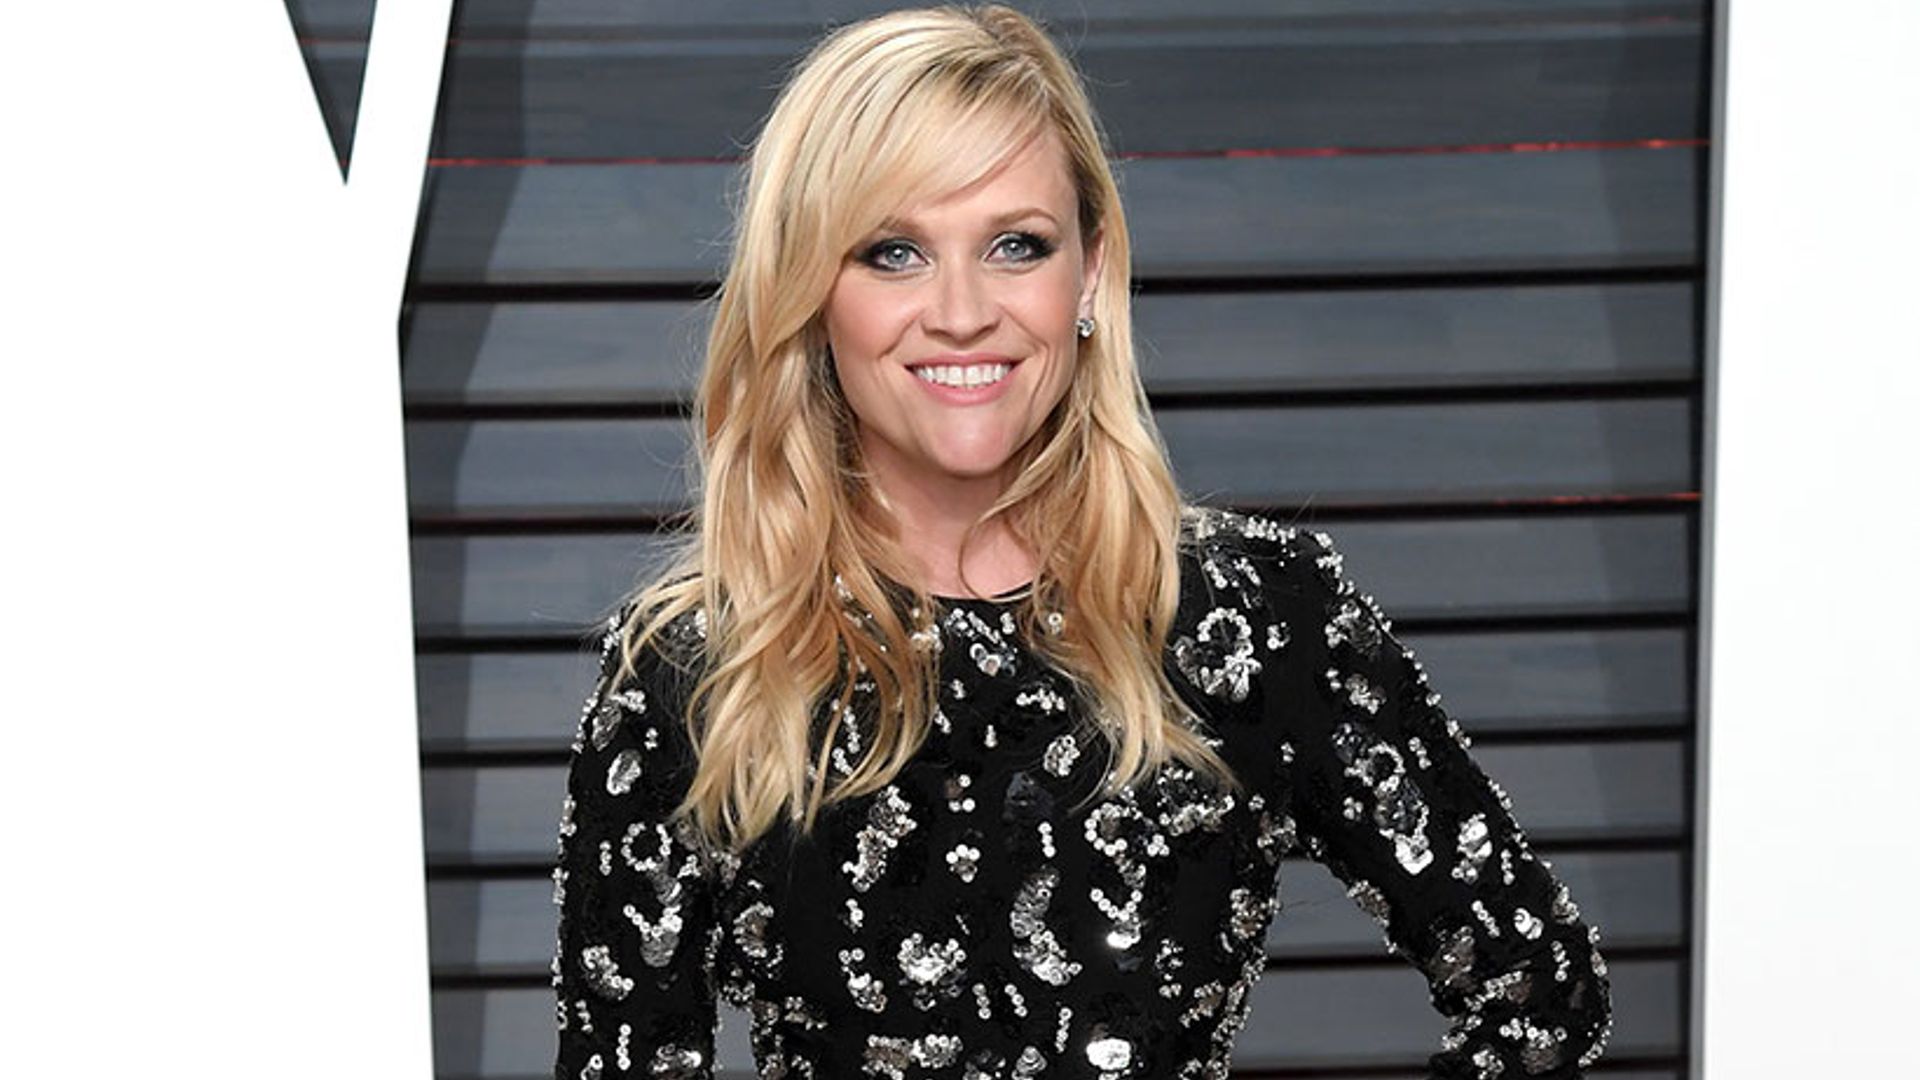 Reese Witherspoon looks radiant in make-up free photo during trip to London